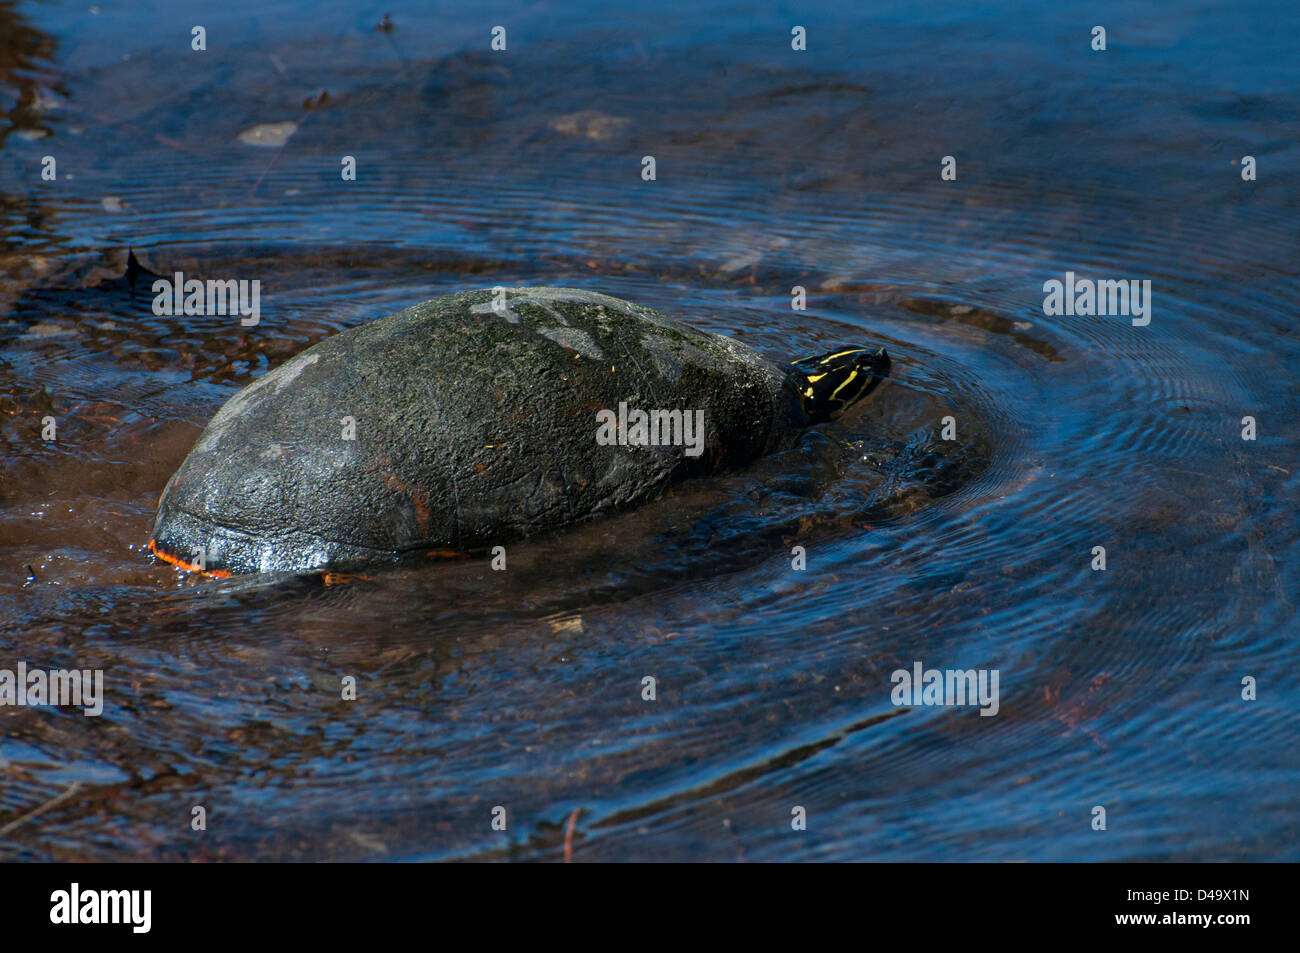 A Florida Red-bellied Turtle. Stock Photo